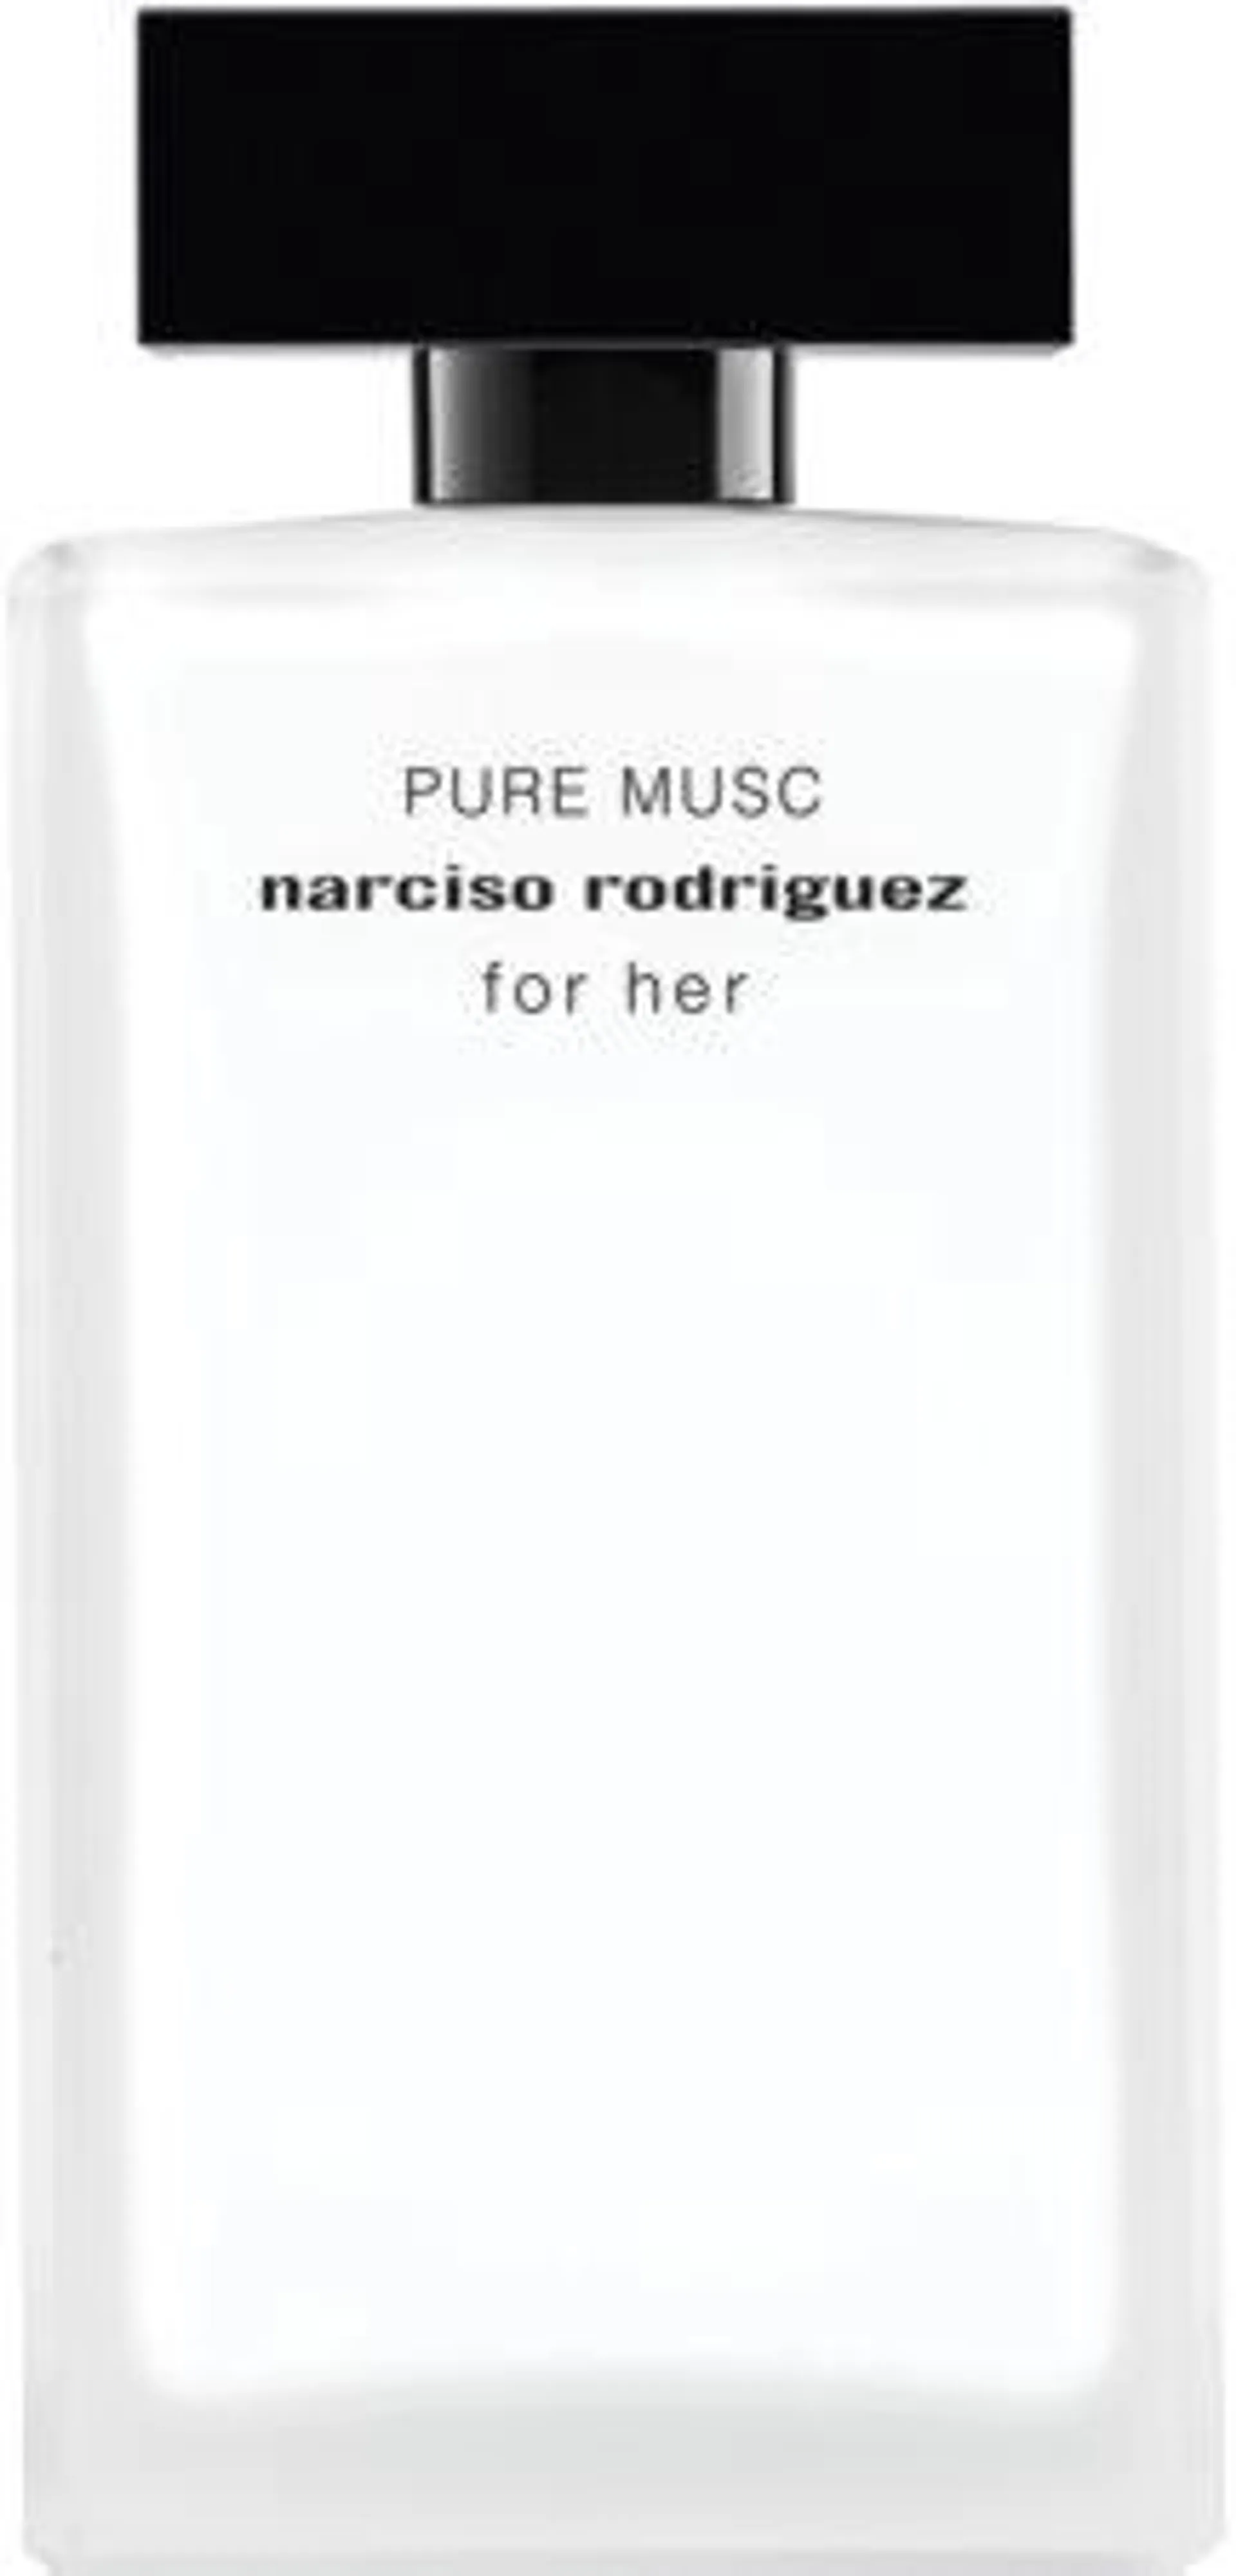 Narciso Rodriguez for her Pure Musc